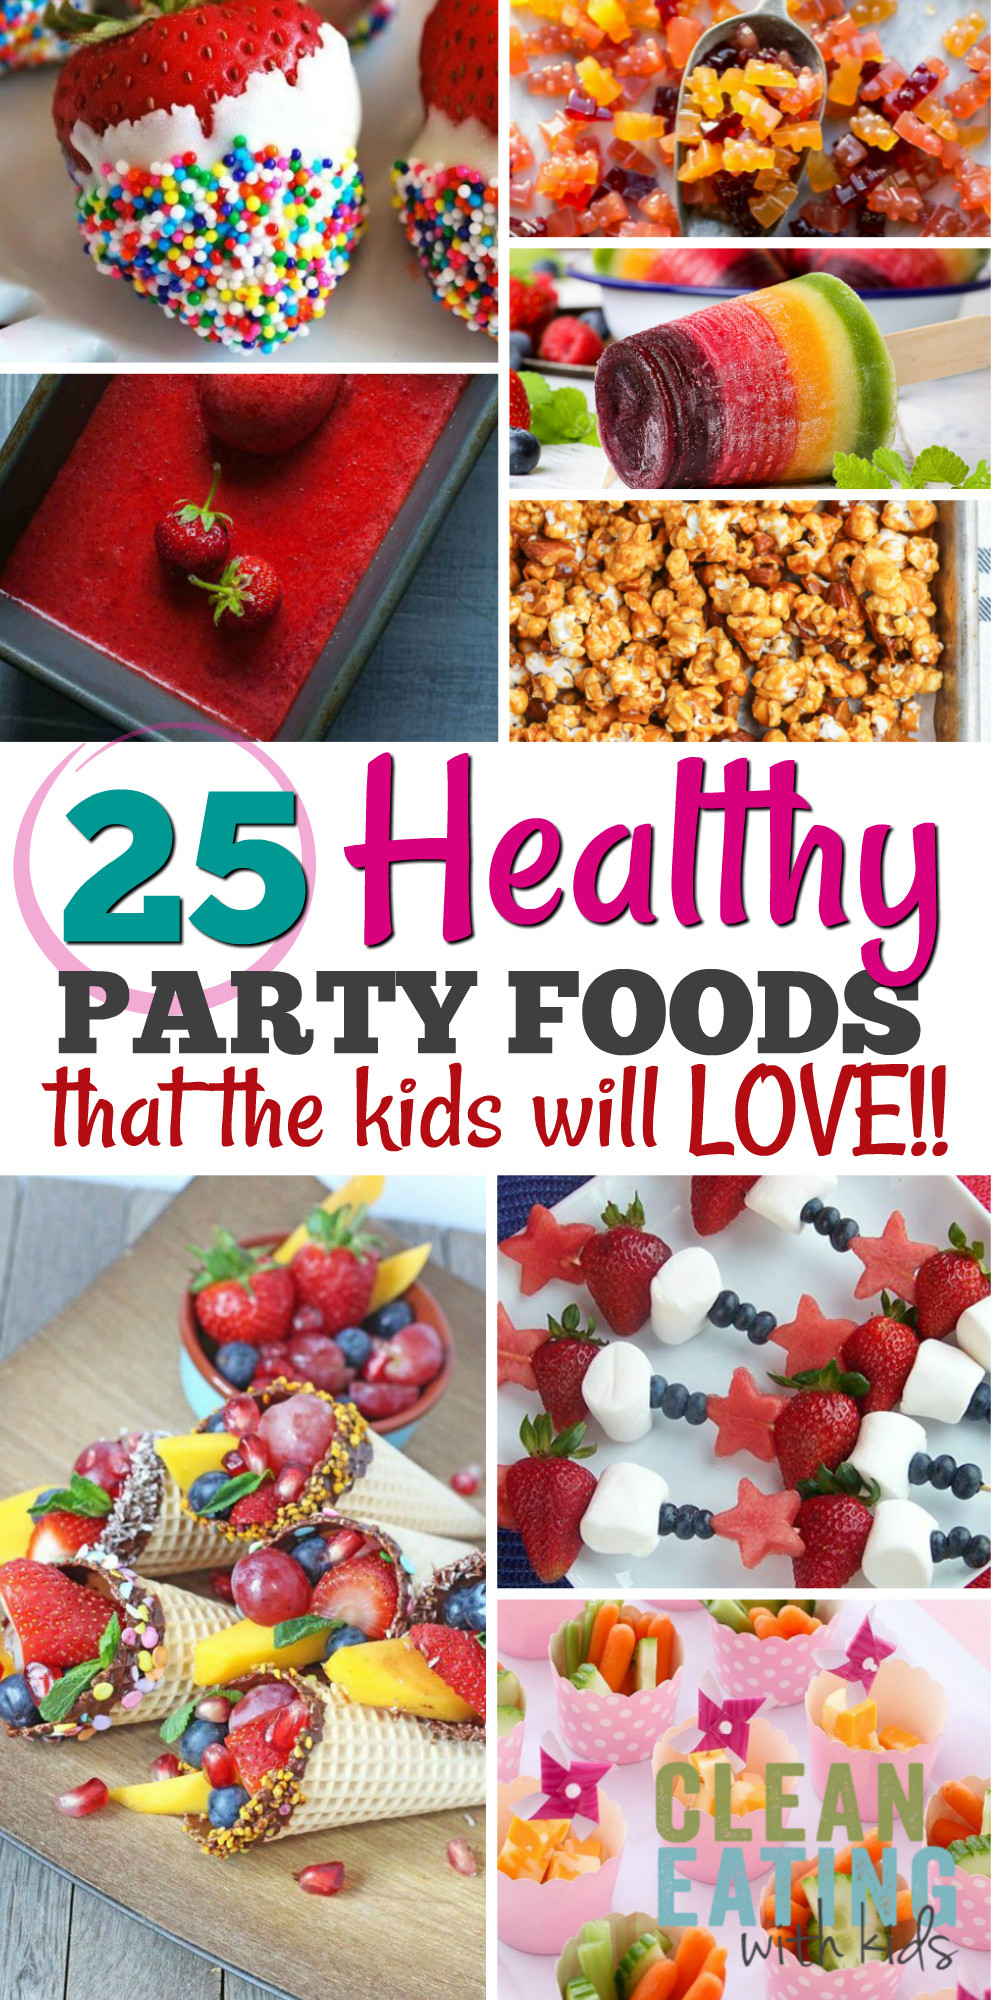 Toddler Bday Party Food Ideas
 25 Healthy Birthday Party Food Ideas Clean Eating with kids